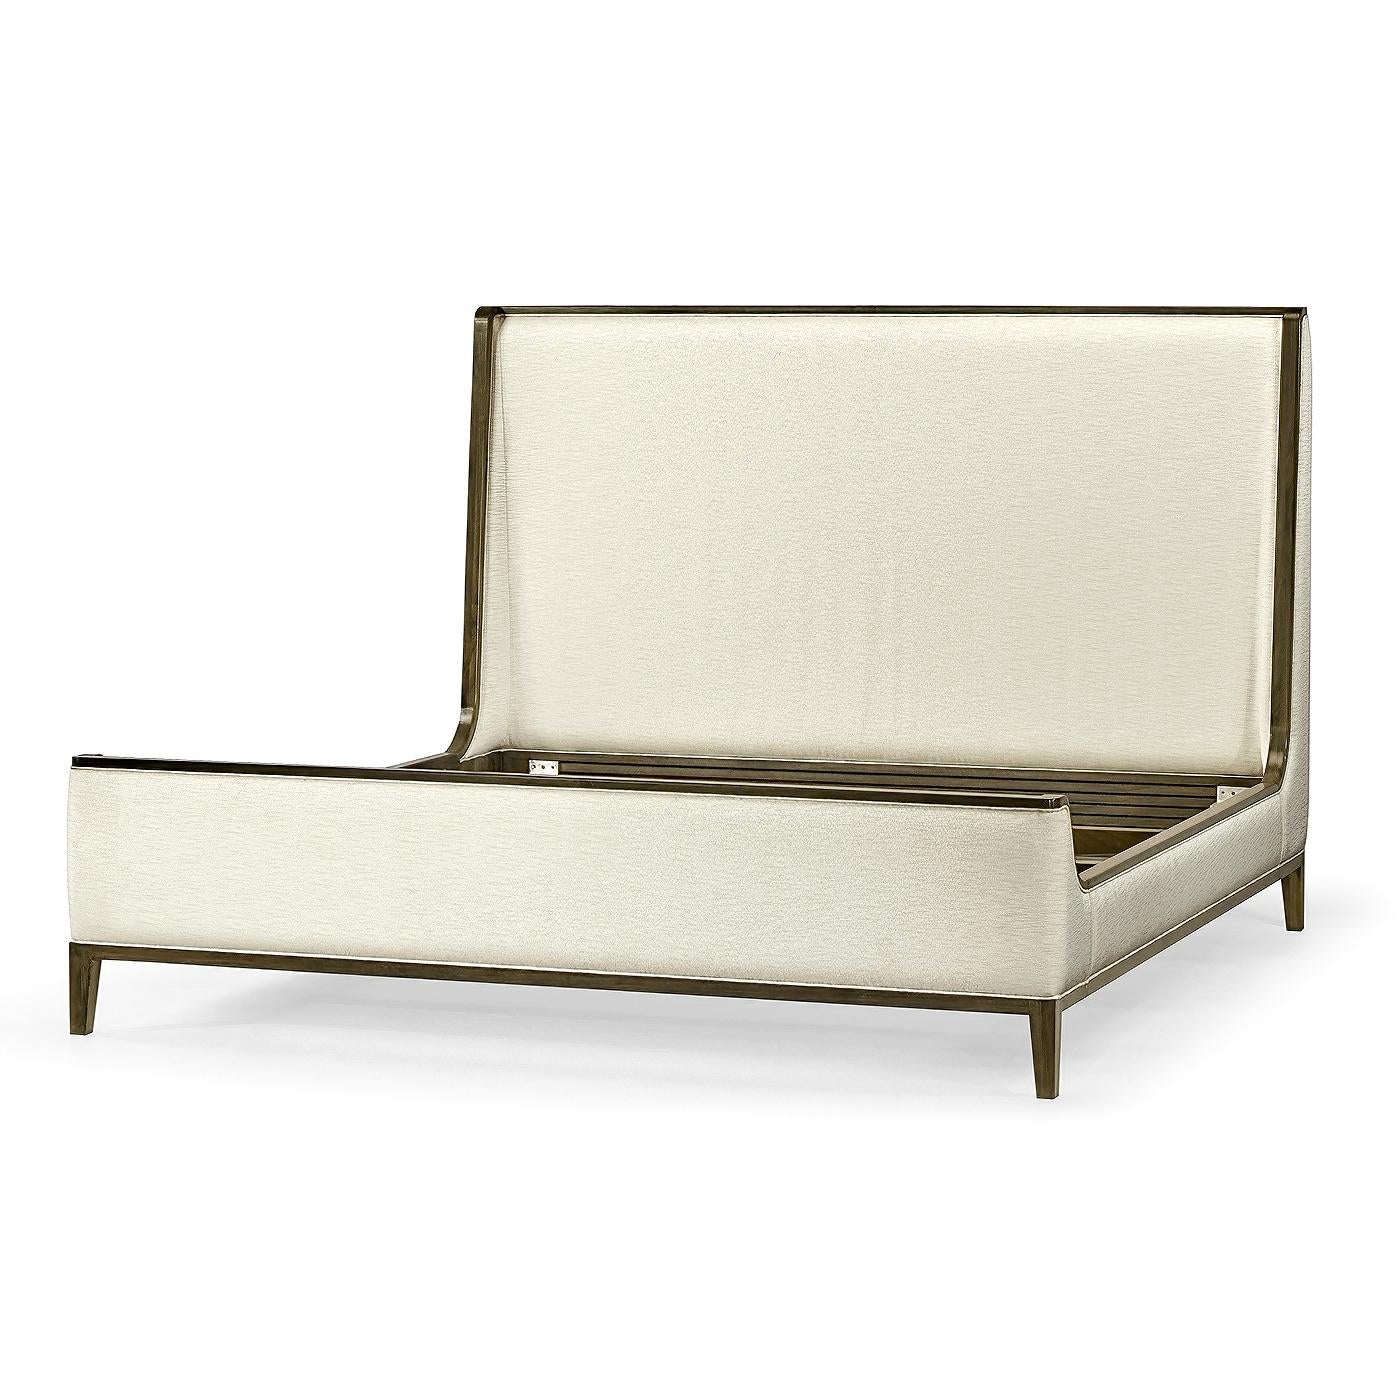 Wood Modern Upholstered Queen Size Bed